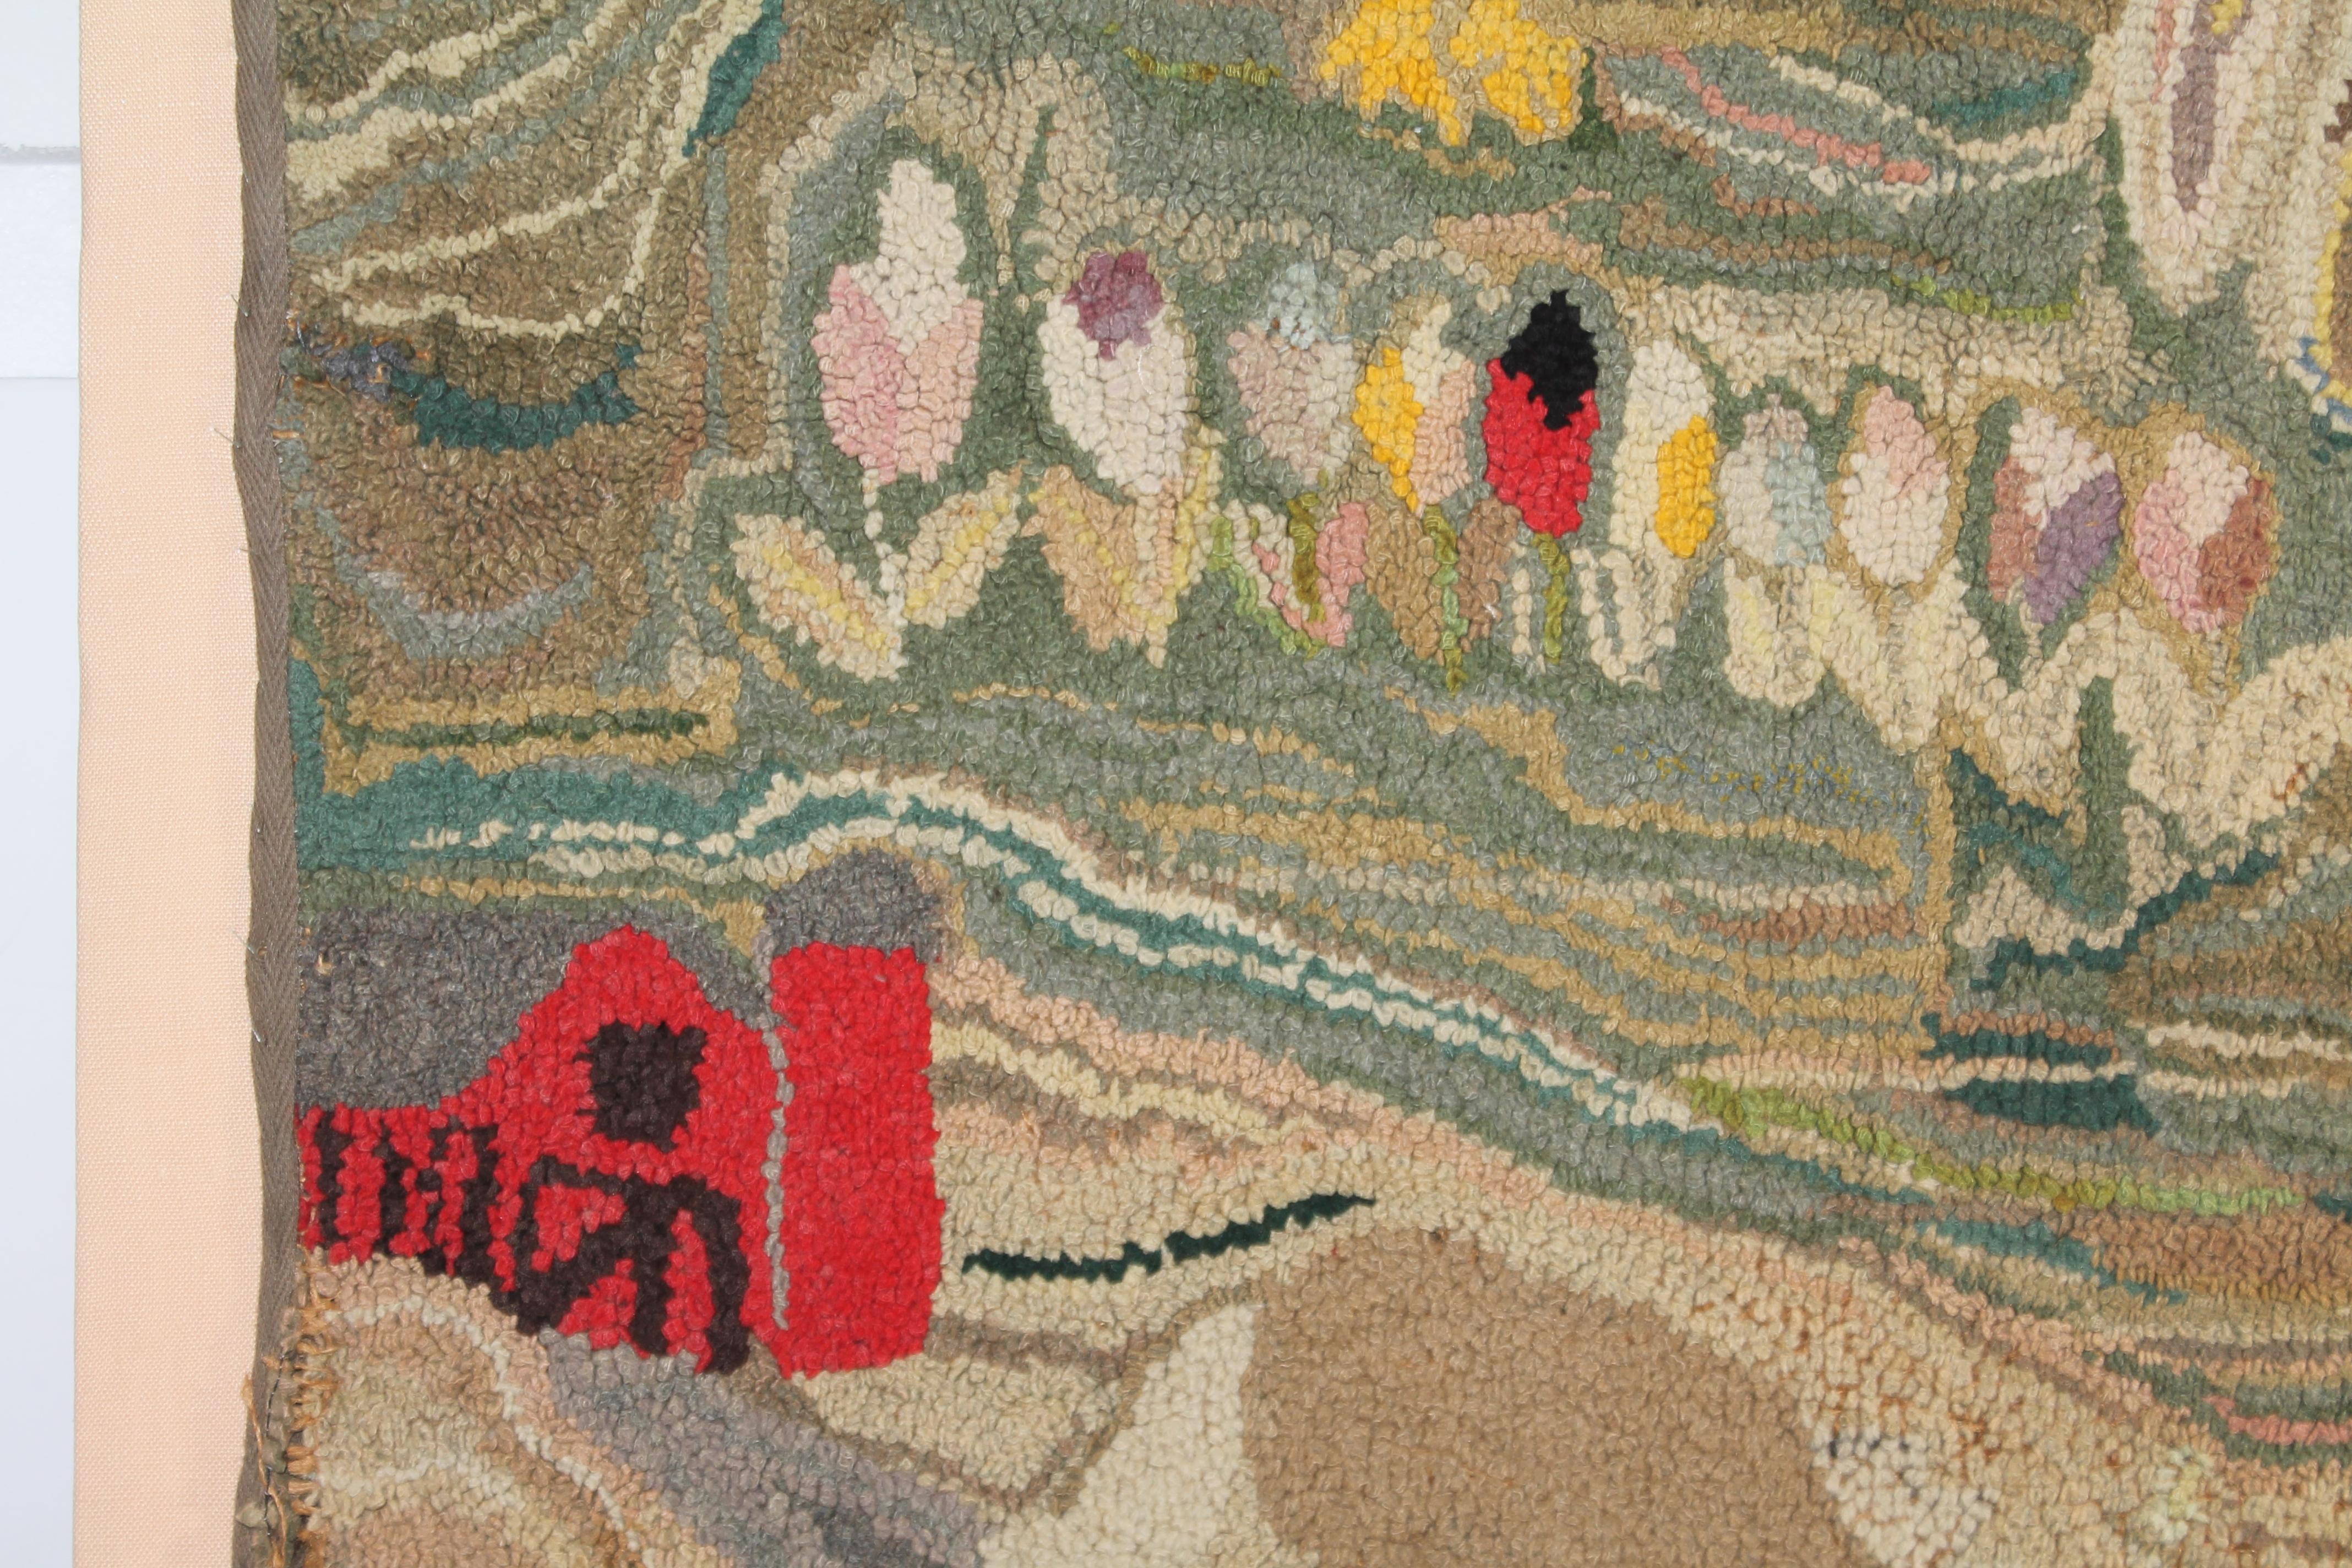 This fantastic hand hooked pictorial farm scene rug with large chicken featured in the center.Originally found in New England.It is sewn on linen and mounted on a stretcher frame.Condition is very good. Ready to hand in your home collection.